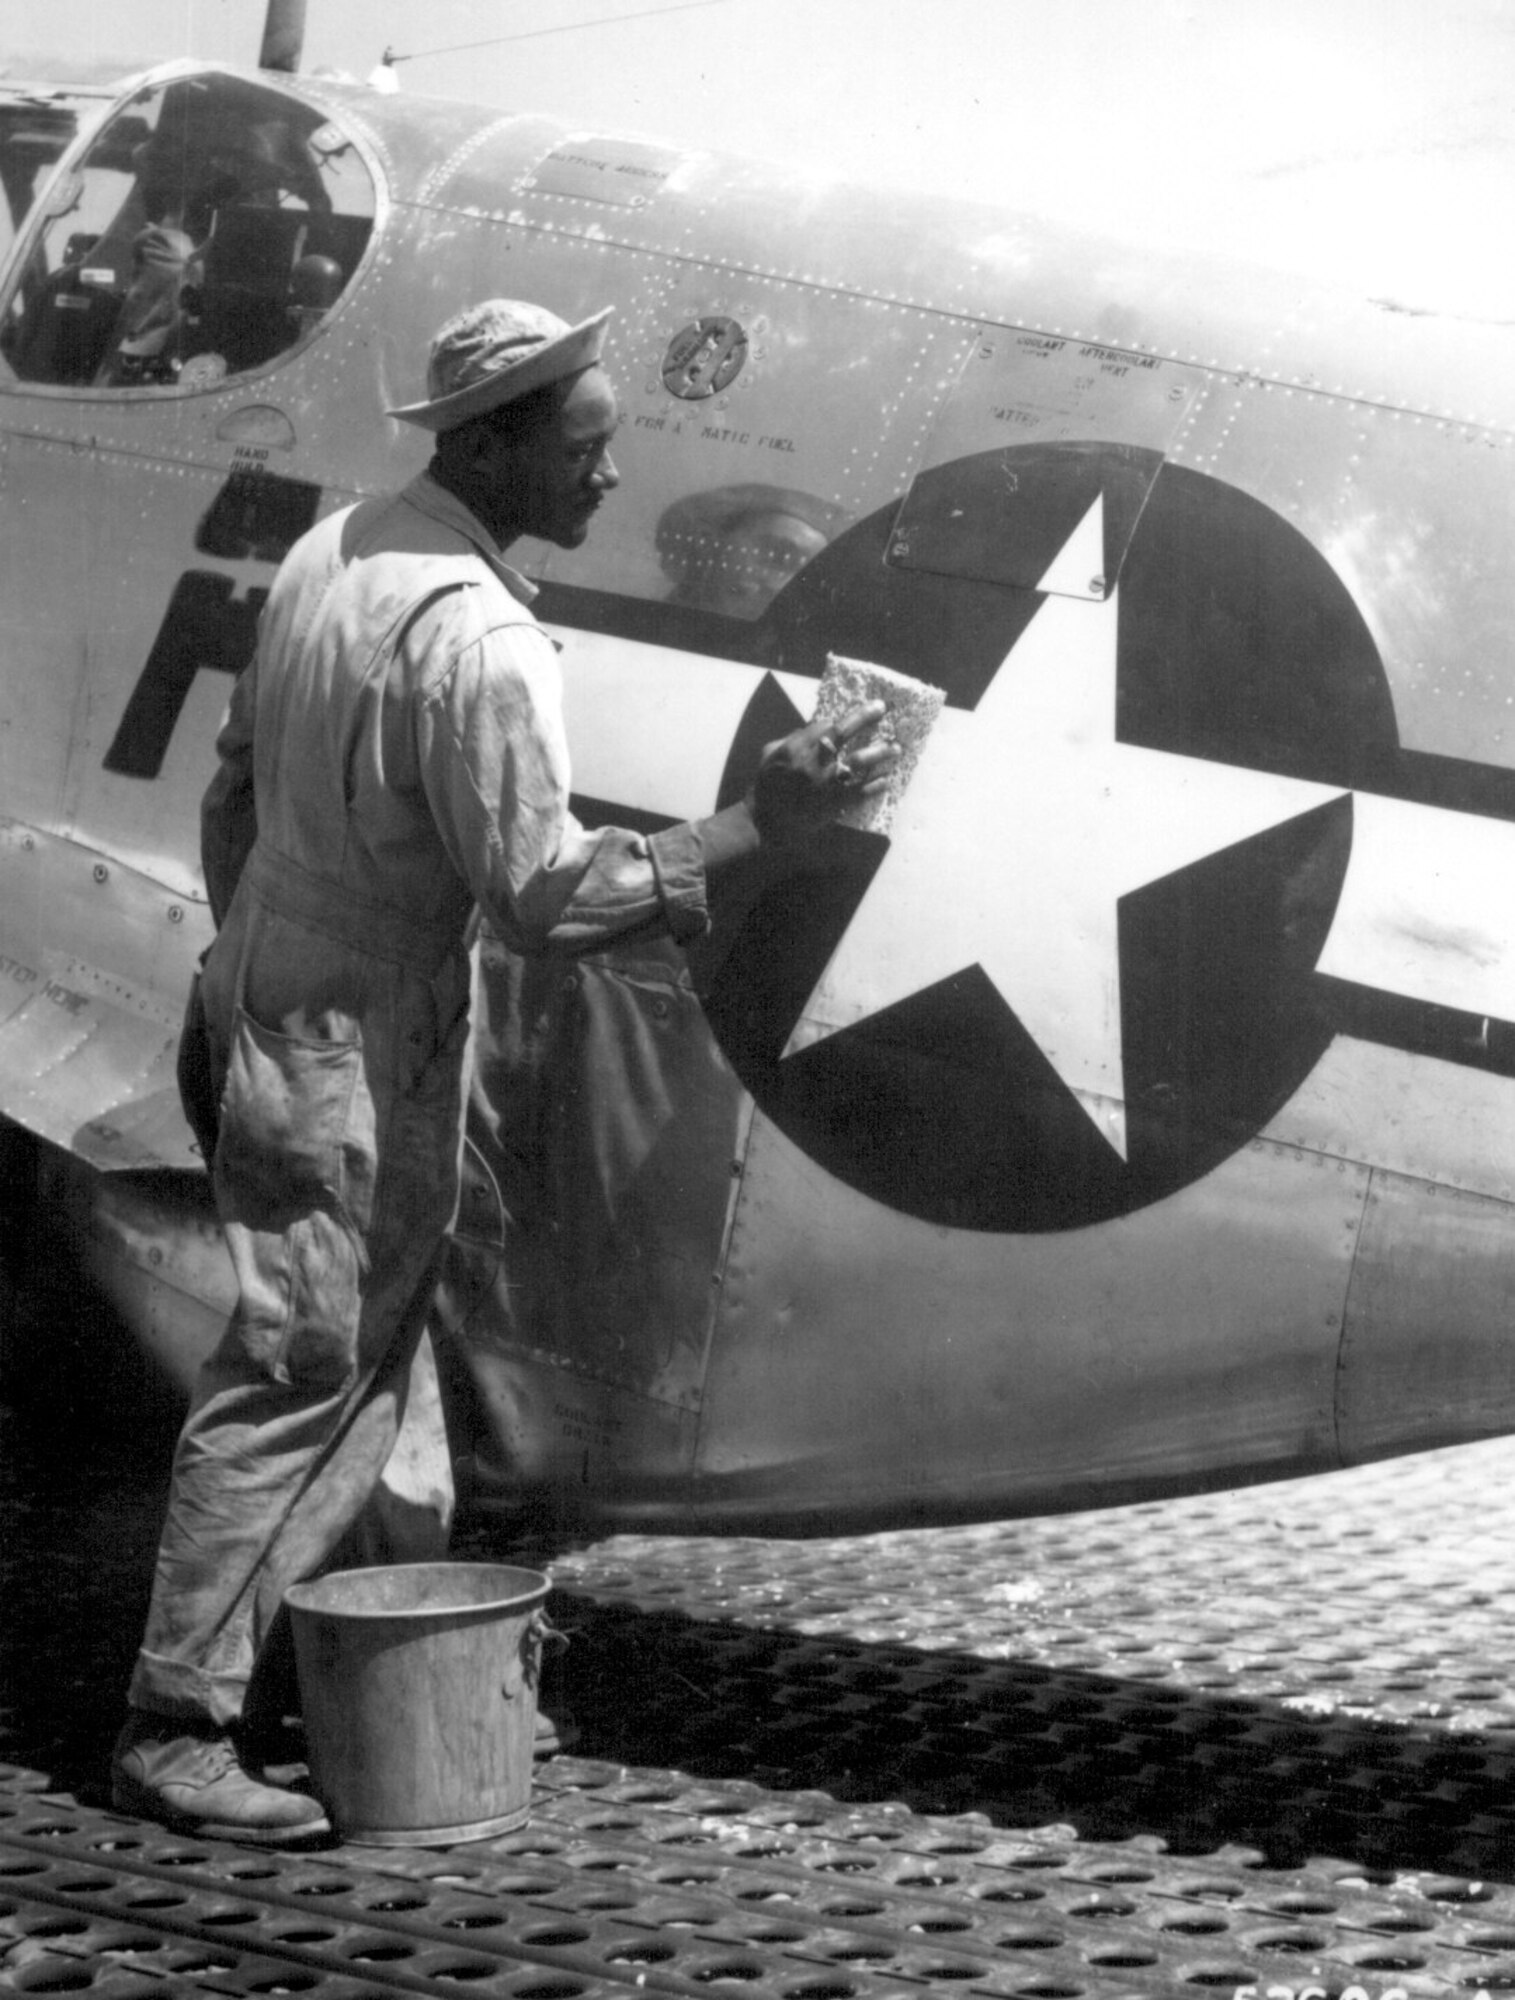 Editor’s note: photo and caption were pulled from the National Archives Catalog.
Staff Sgt. William Accoo, crew chief in a Negro group of the 15th U.S. Air Force, washes down the P-51 Mustang fighter plane of his pilot with soap and water before waxing it to give it more speed. 
Ca. September 1944. 208-AA-46BB-30.